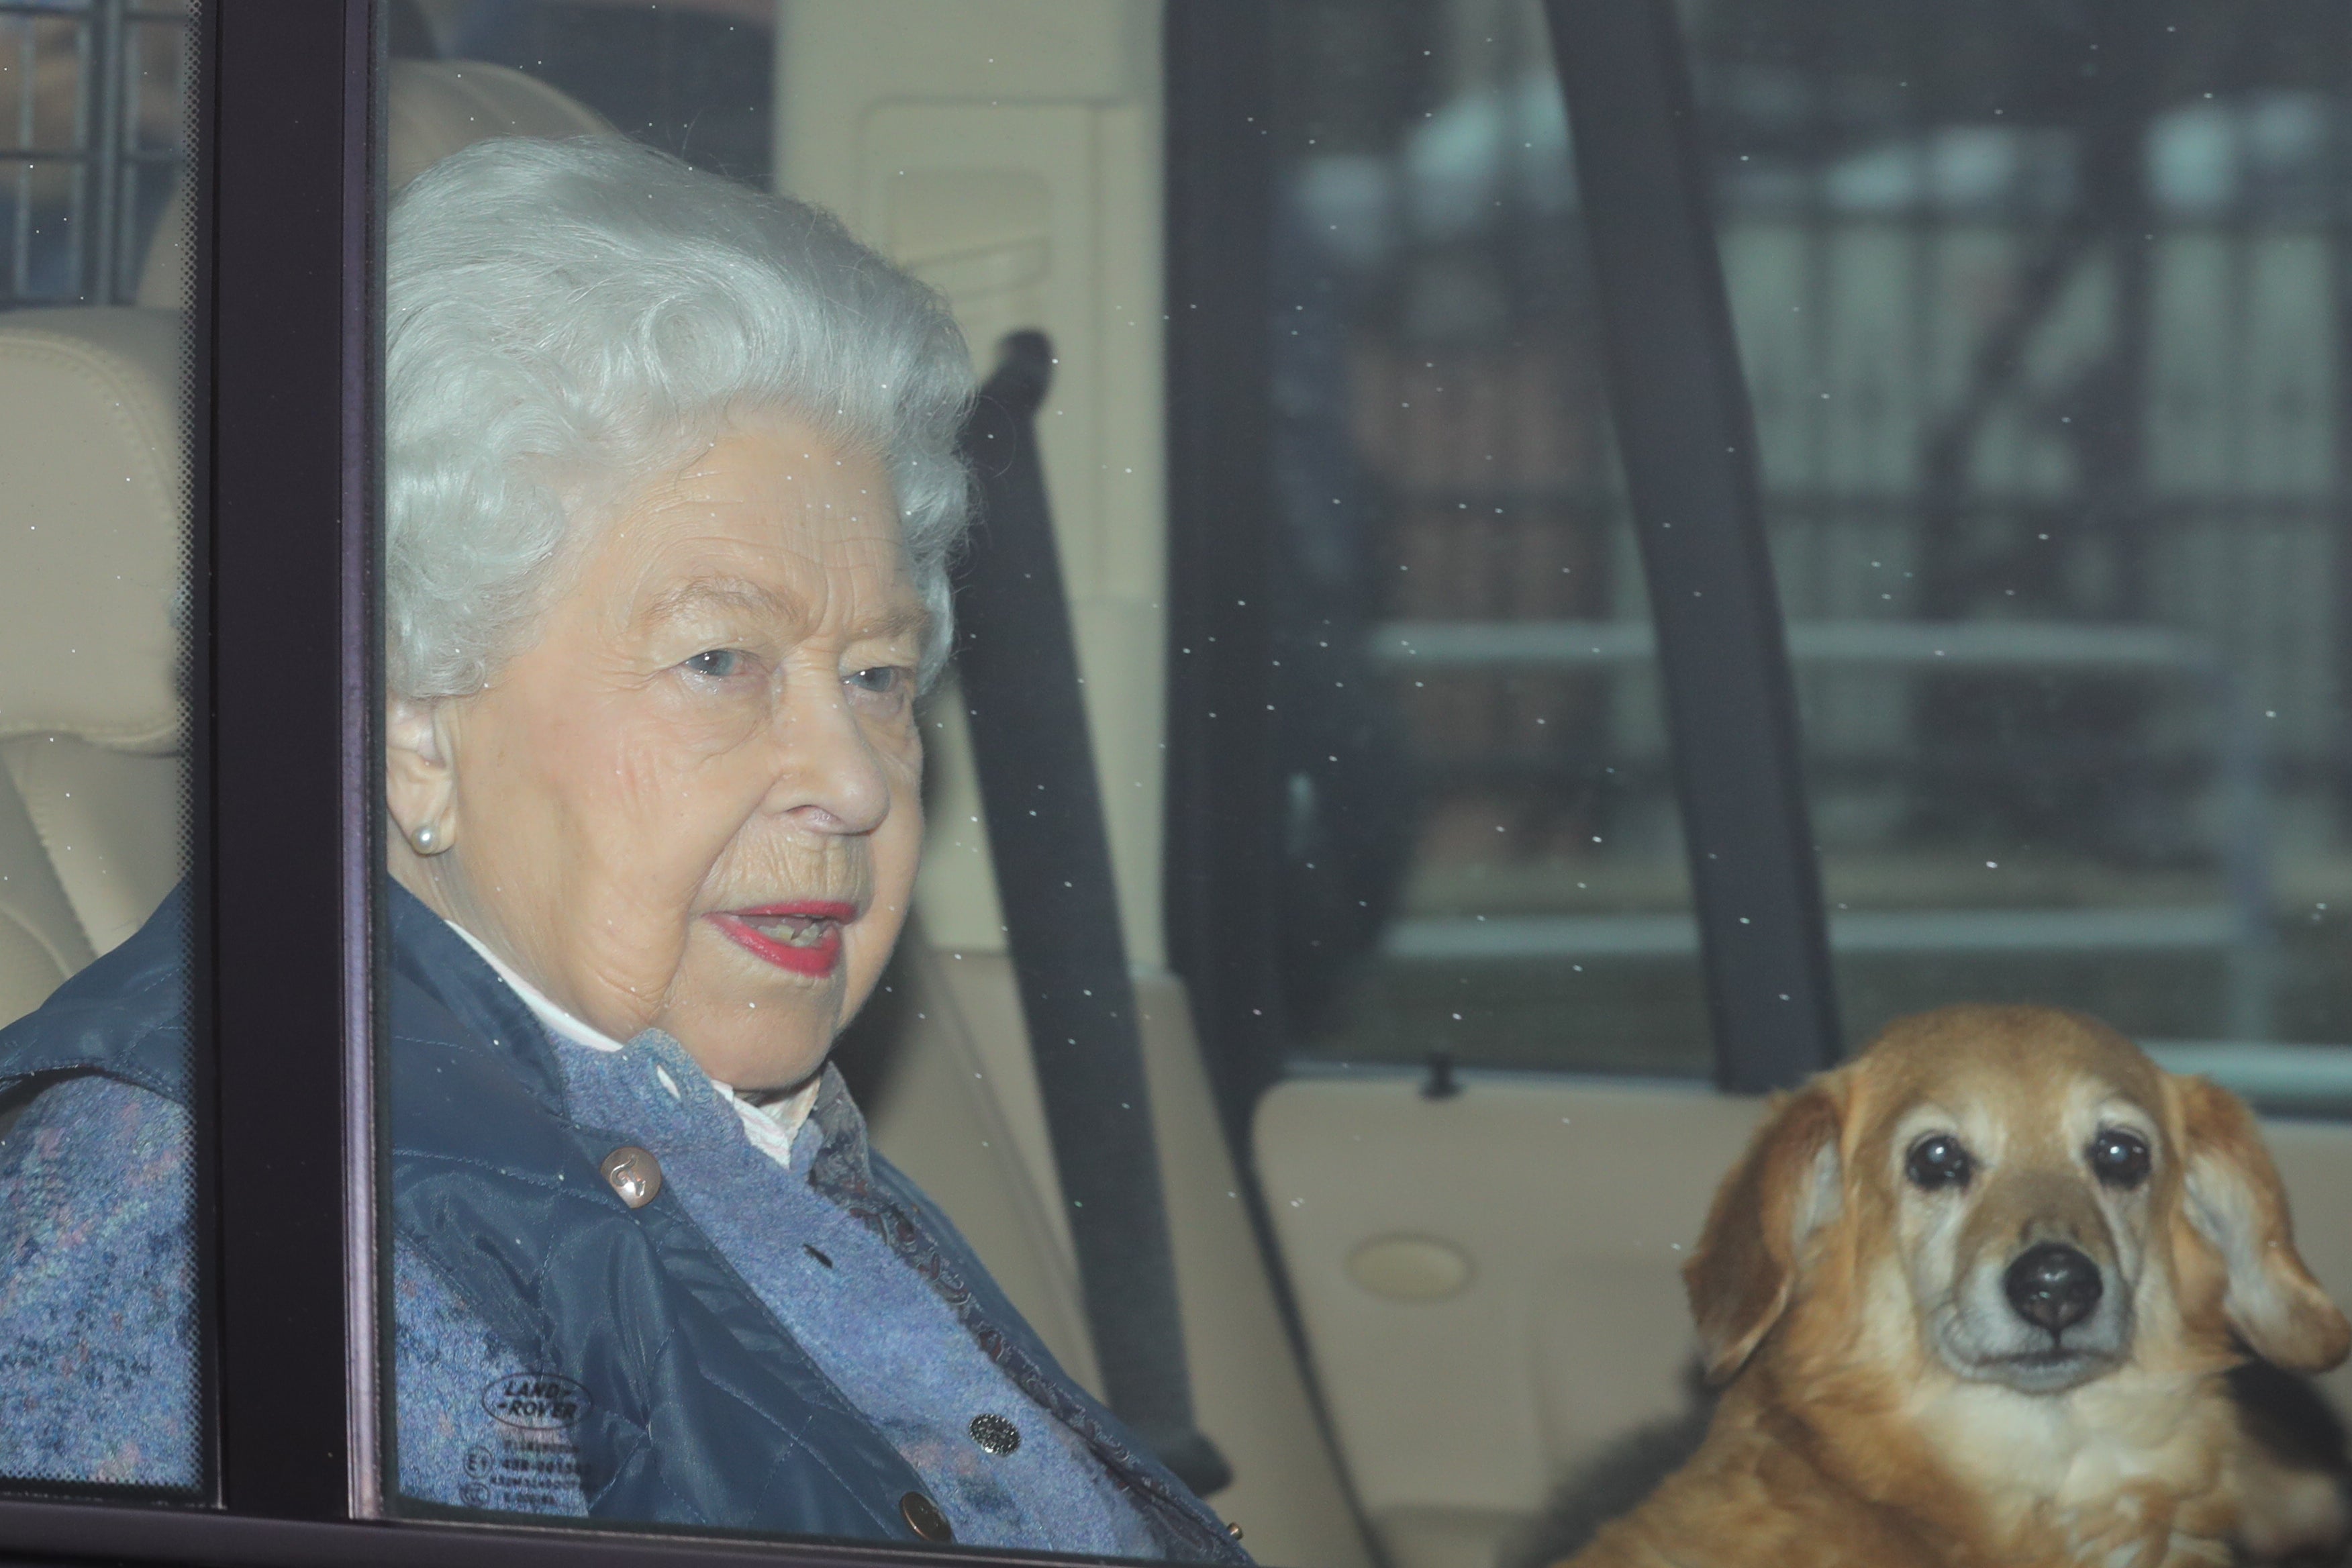 The Queen leaves Buckingham Palace with her dorgi, Candy, ahead of the first lockdown in March 2020 (Aaron Chown/PA)